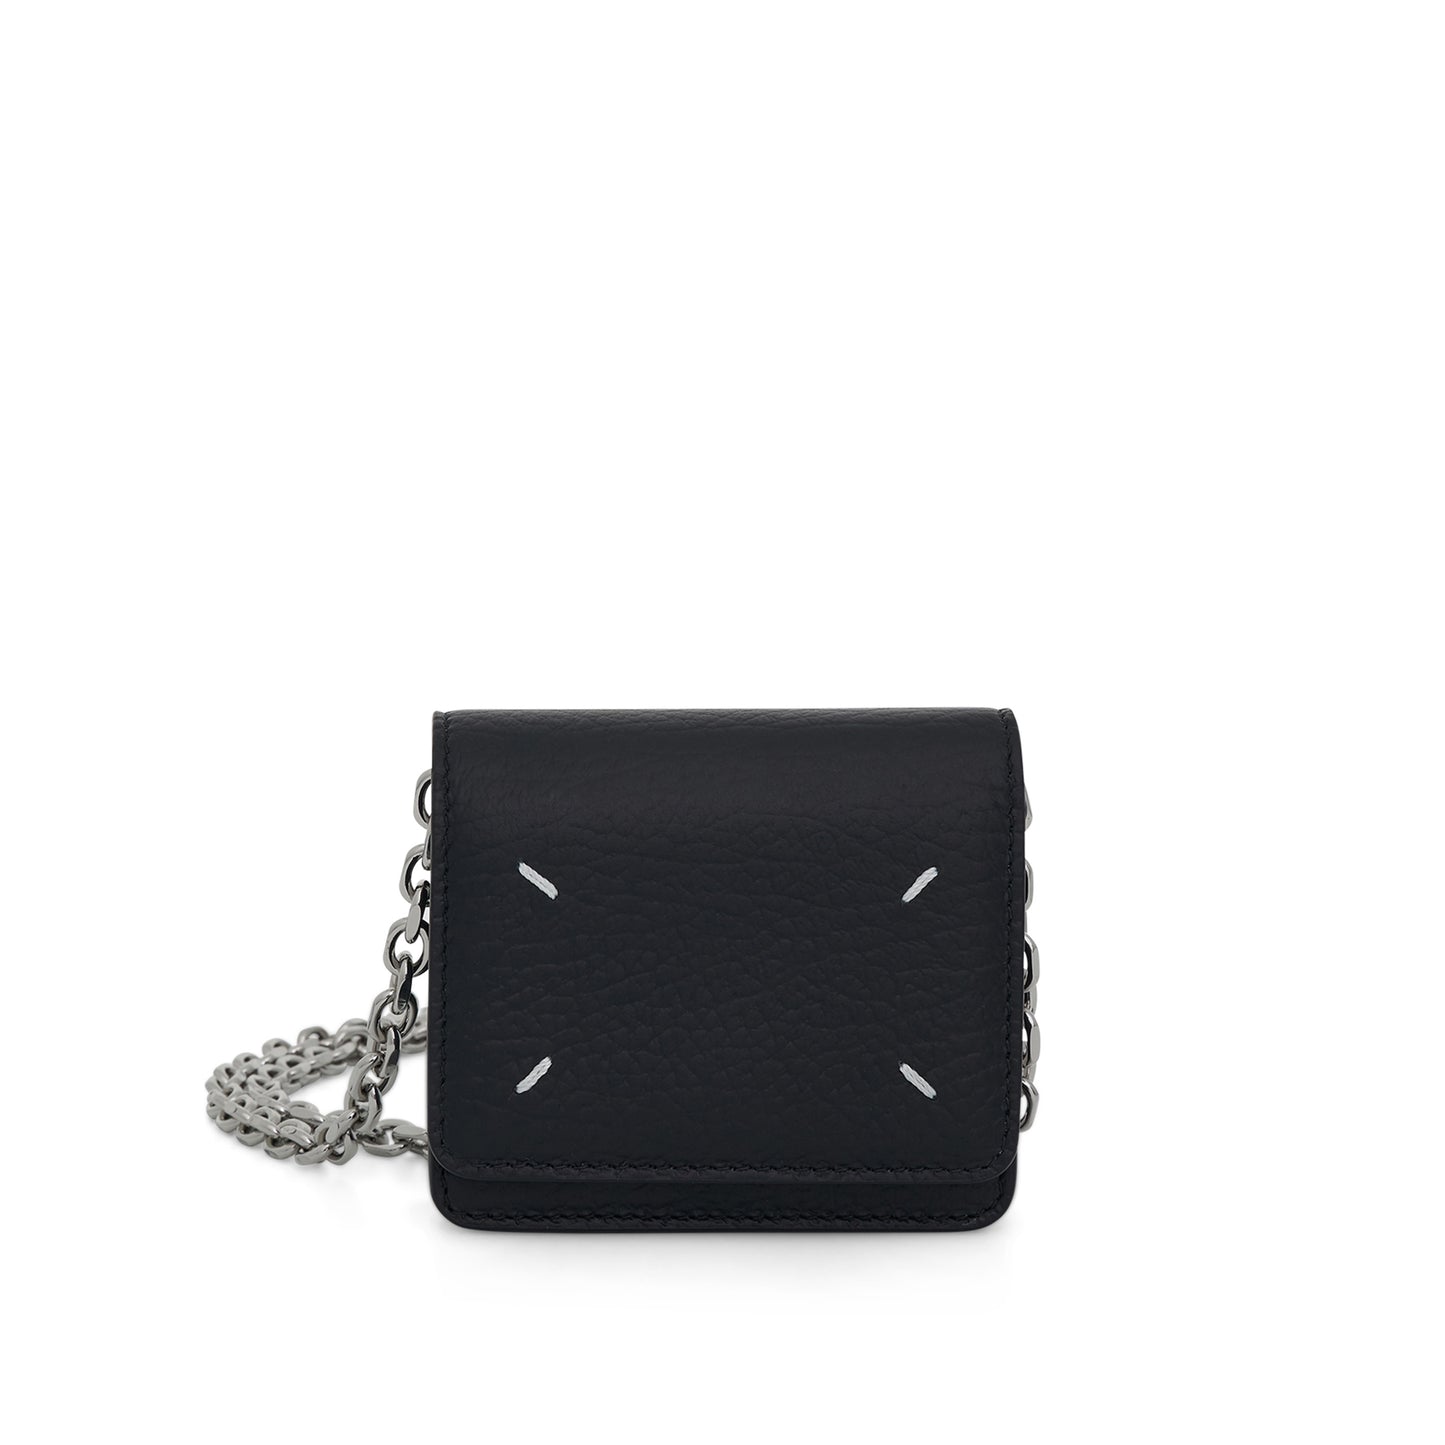 Small Chain Leather Wallet in Black